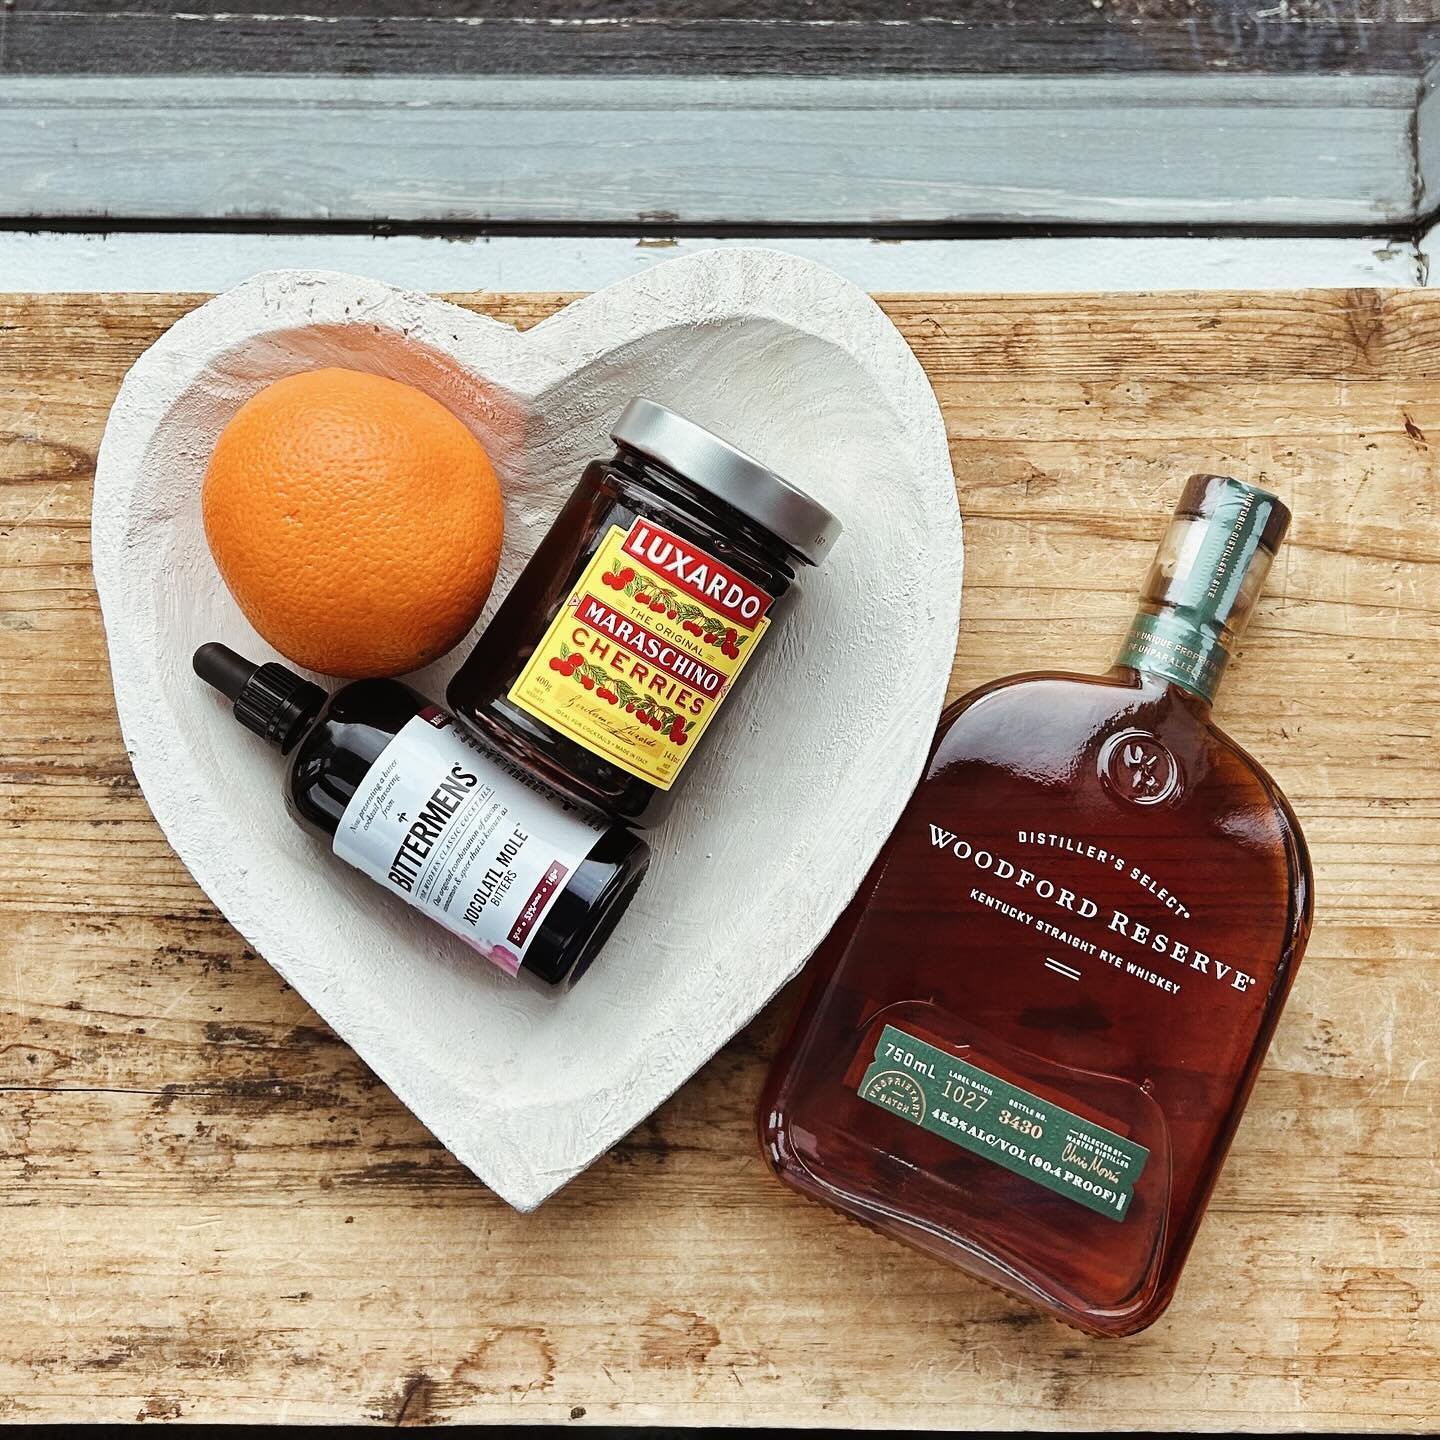 Another week, another round of tastings! Stop into the wine shop tonight for a Valentine&rsquo;s Day themed &ldquo;Old Fashioned&rdquo; featuring @woodfordreserve rye whiskey and @bittermens chocolate bitters! On Friday kick off the weekend with two 